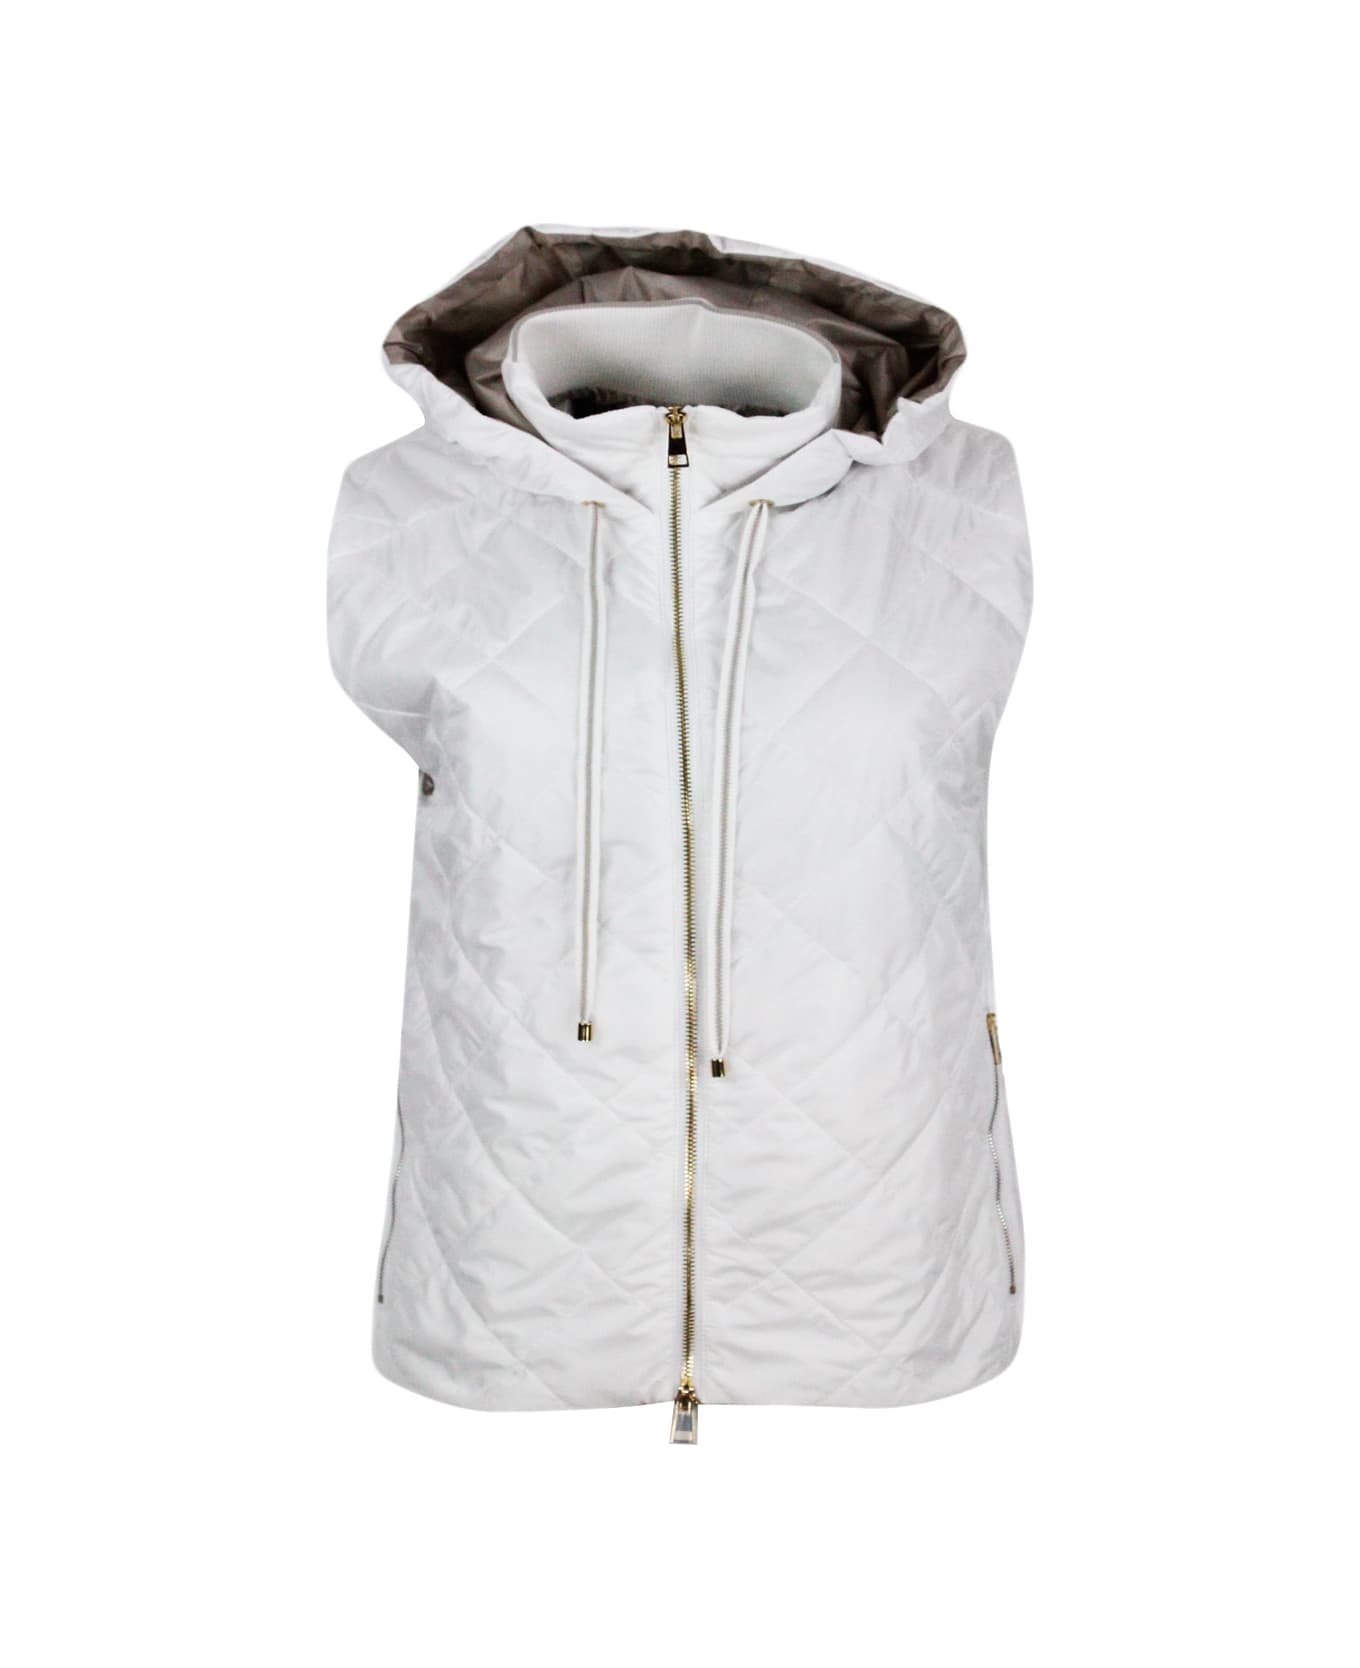 Lorena Antoniazzi Lightweight Quilted Sleeveless Vest In Nylon With Detachable Hood And Zip Closure - White